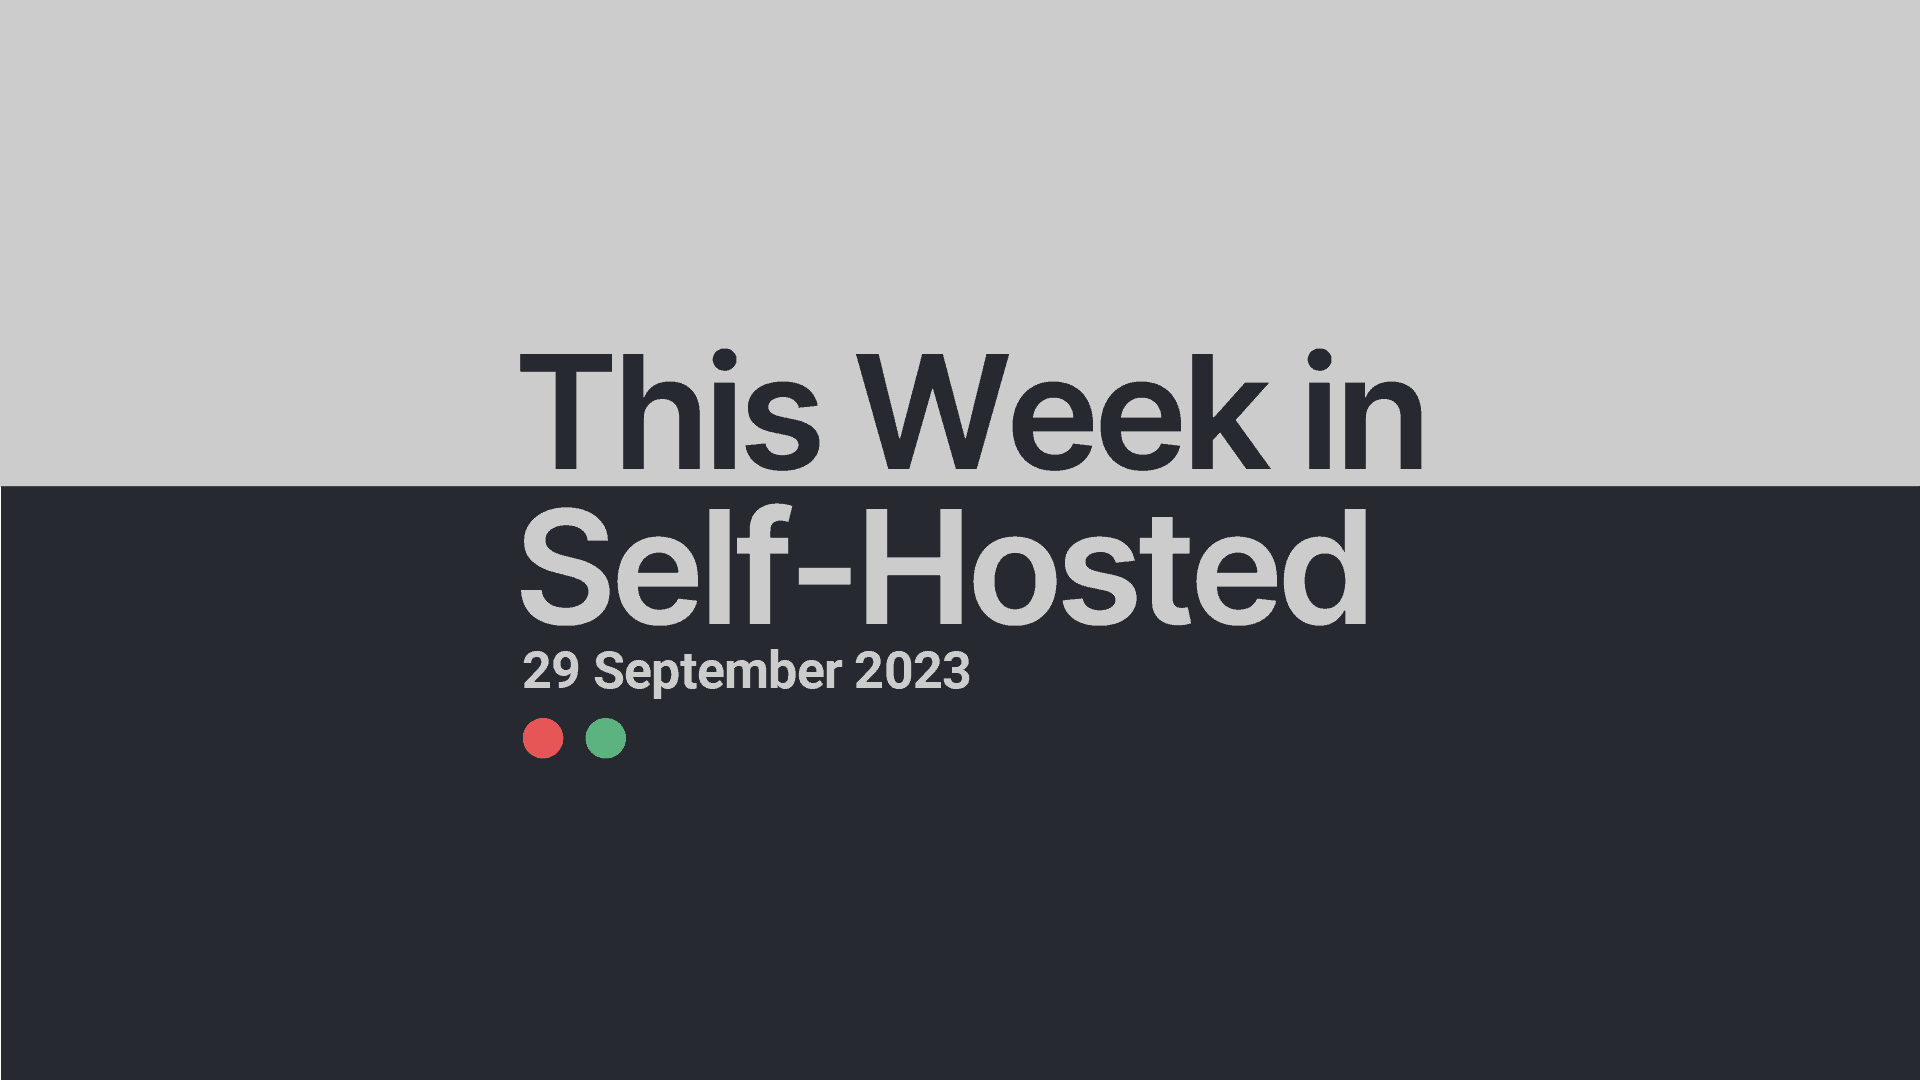 This Week in Self-Hosted (29 September 2023) Post image